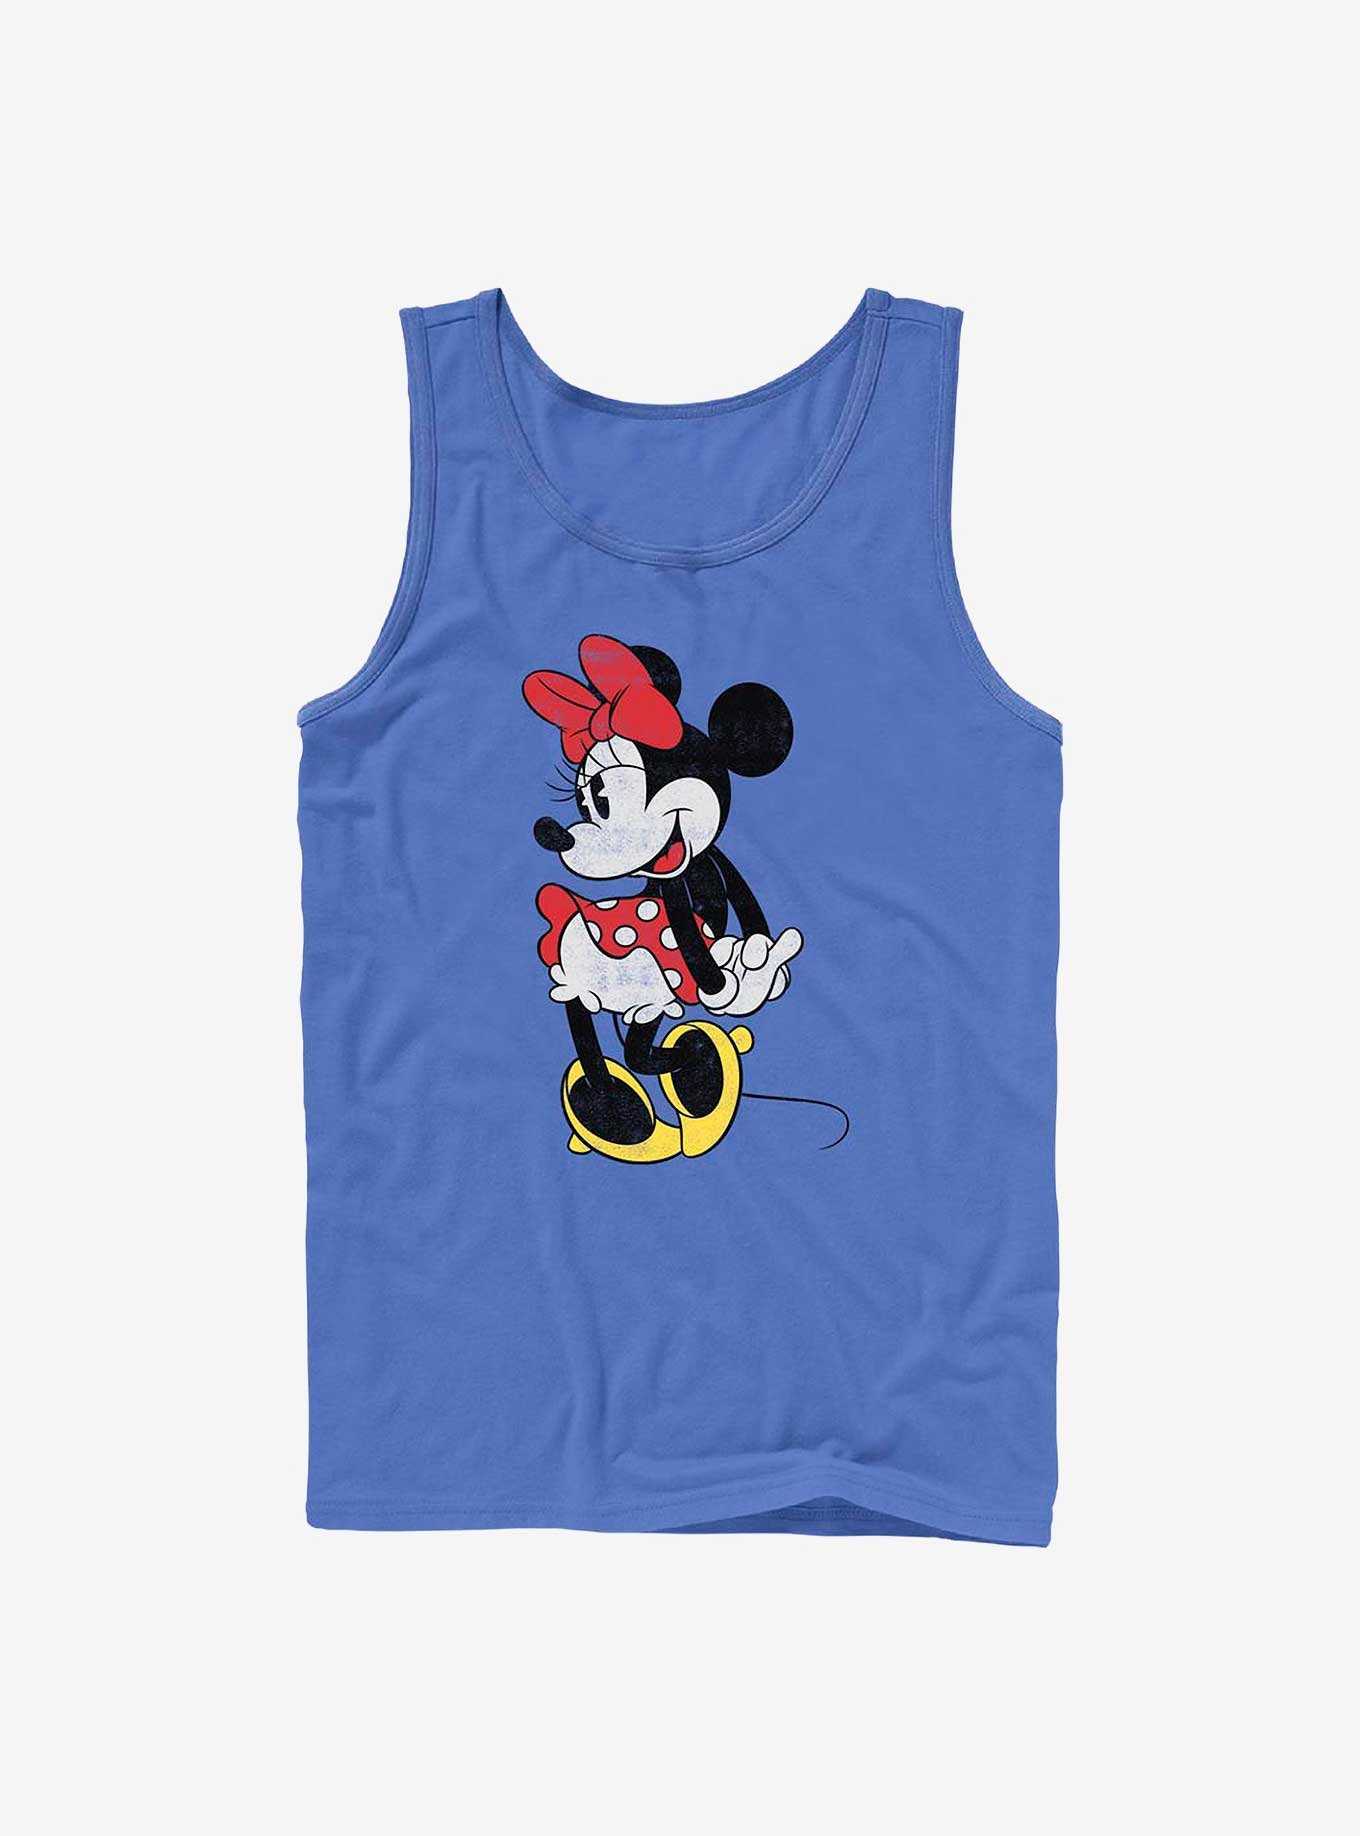 Two Amazing New Men's Tank Tops Land at Disney Springs! 